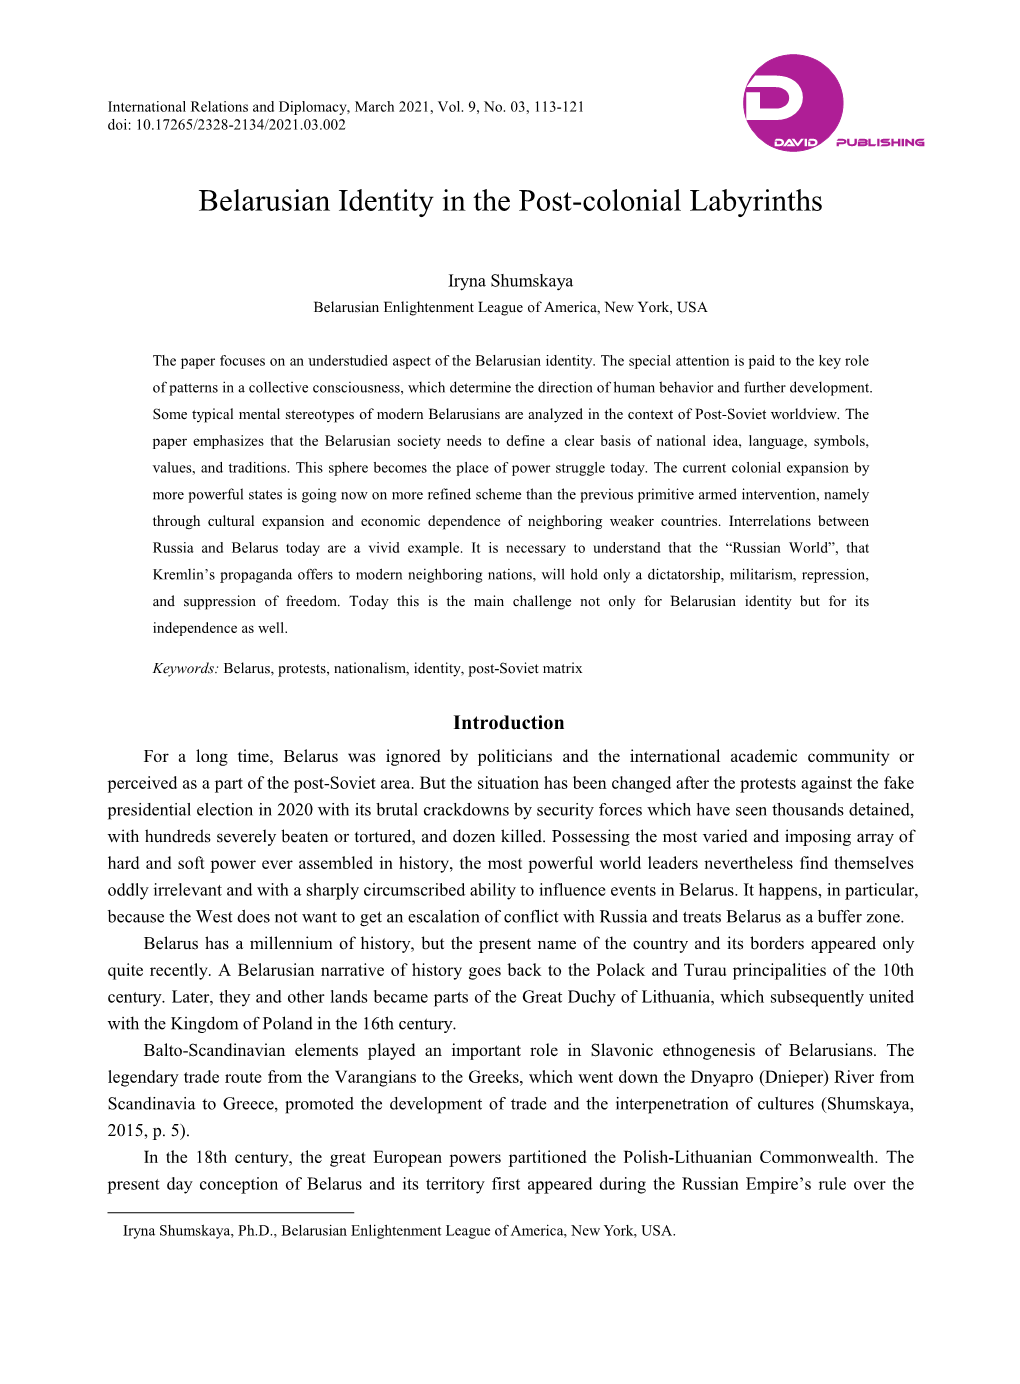 Belarusian Identity in the Post-Colonial Labyrinths